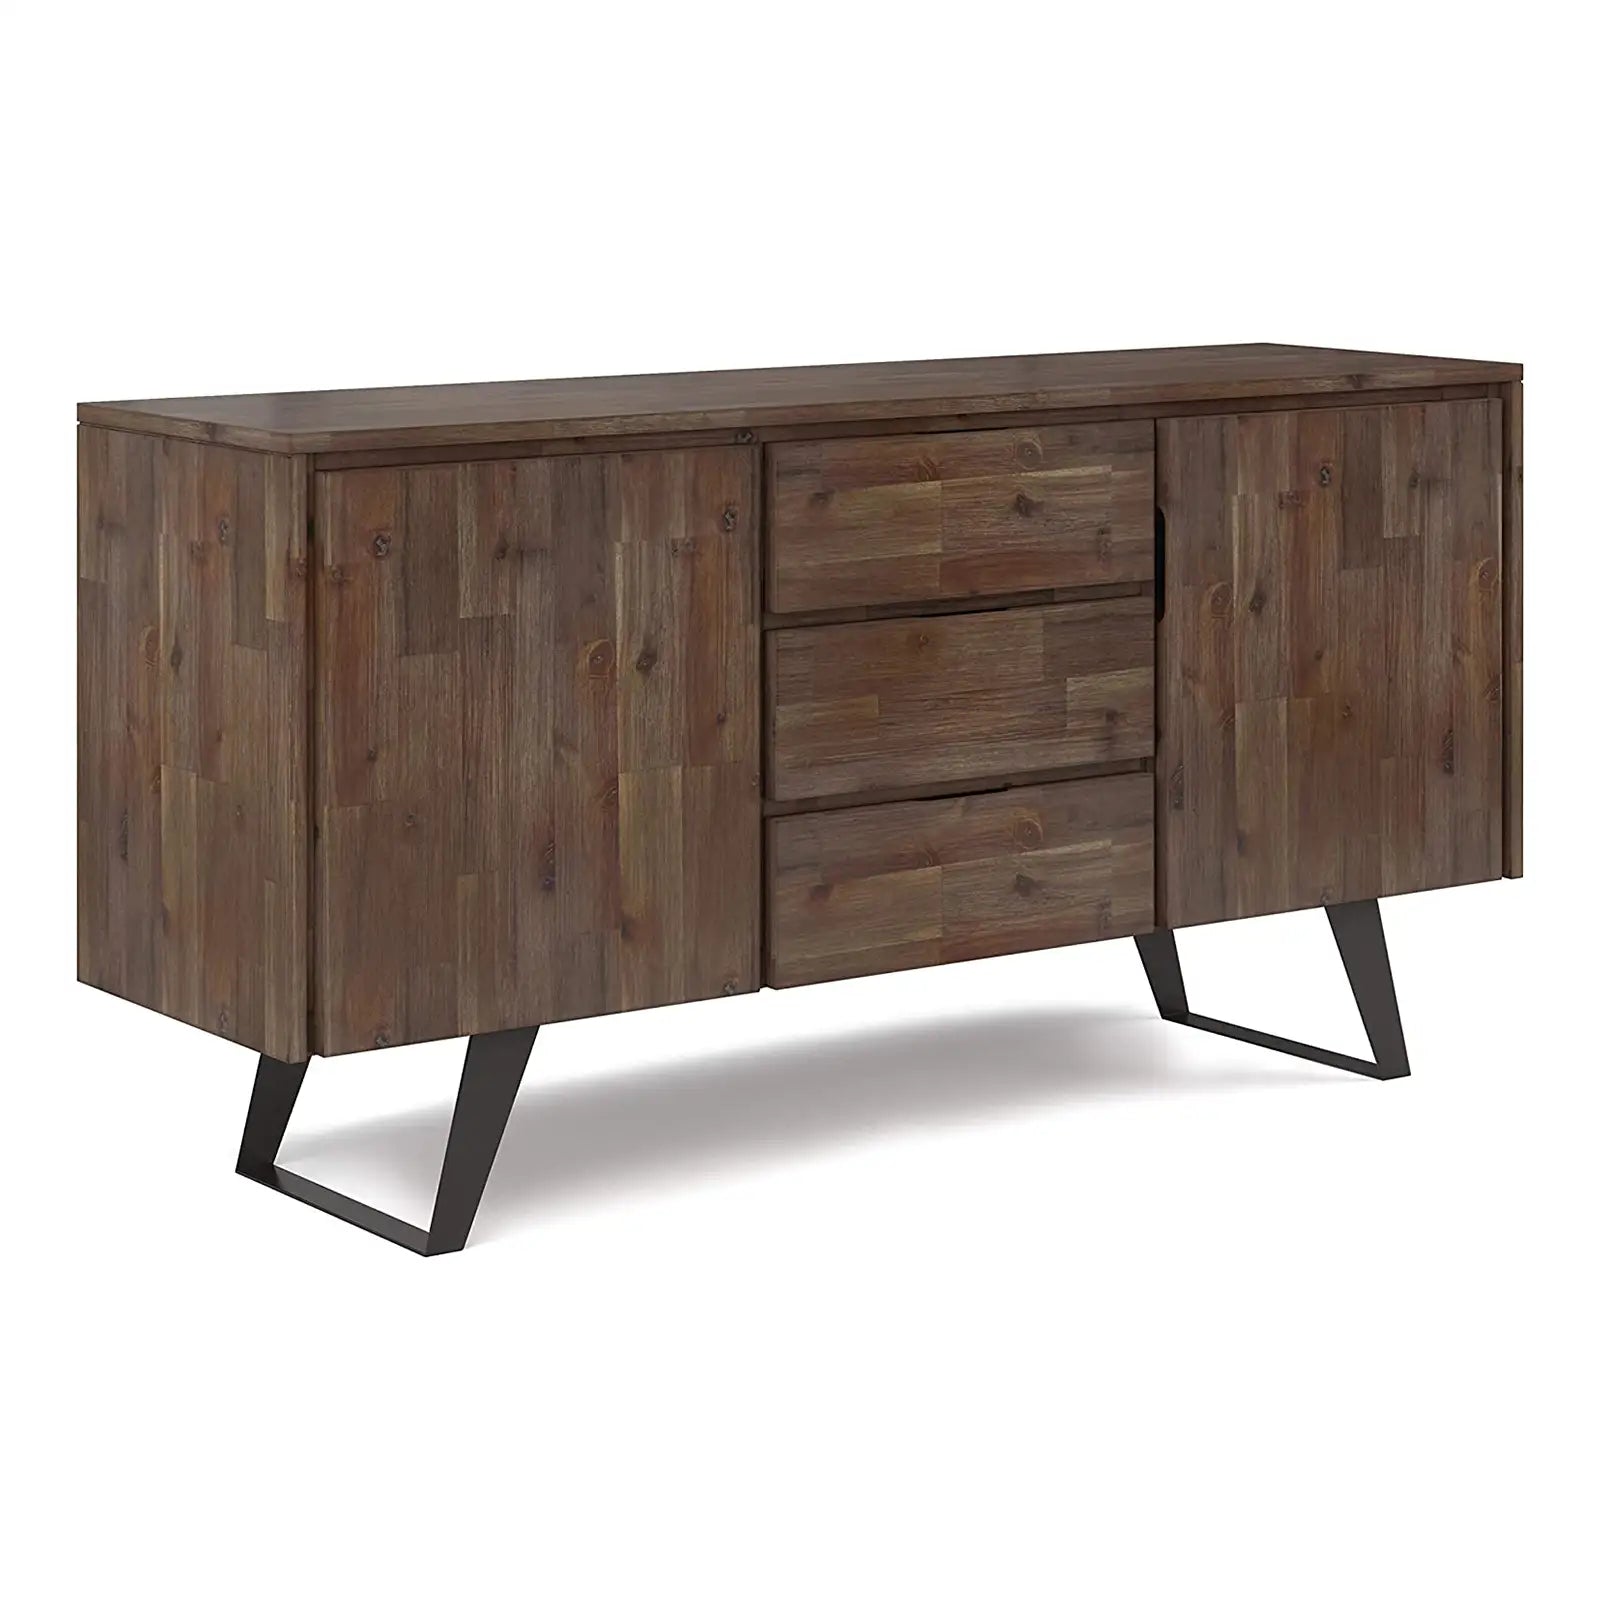 Solid Acacia Wood and Metal Sideboard Buffet with Storage Compartment